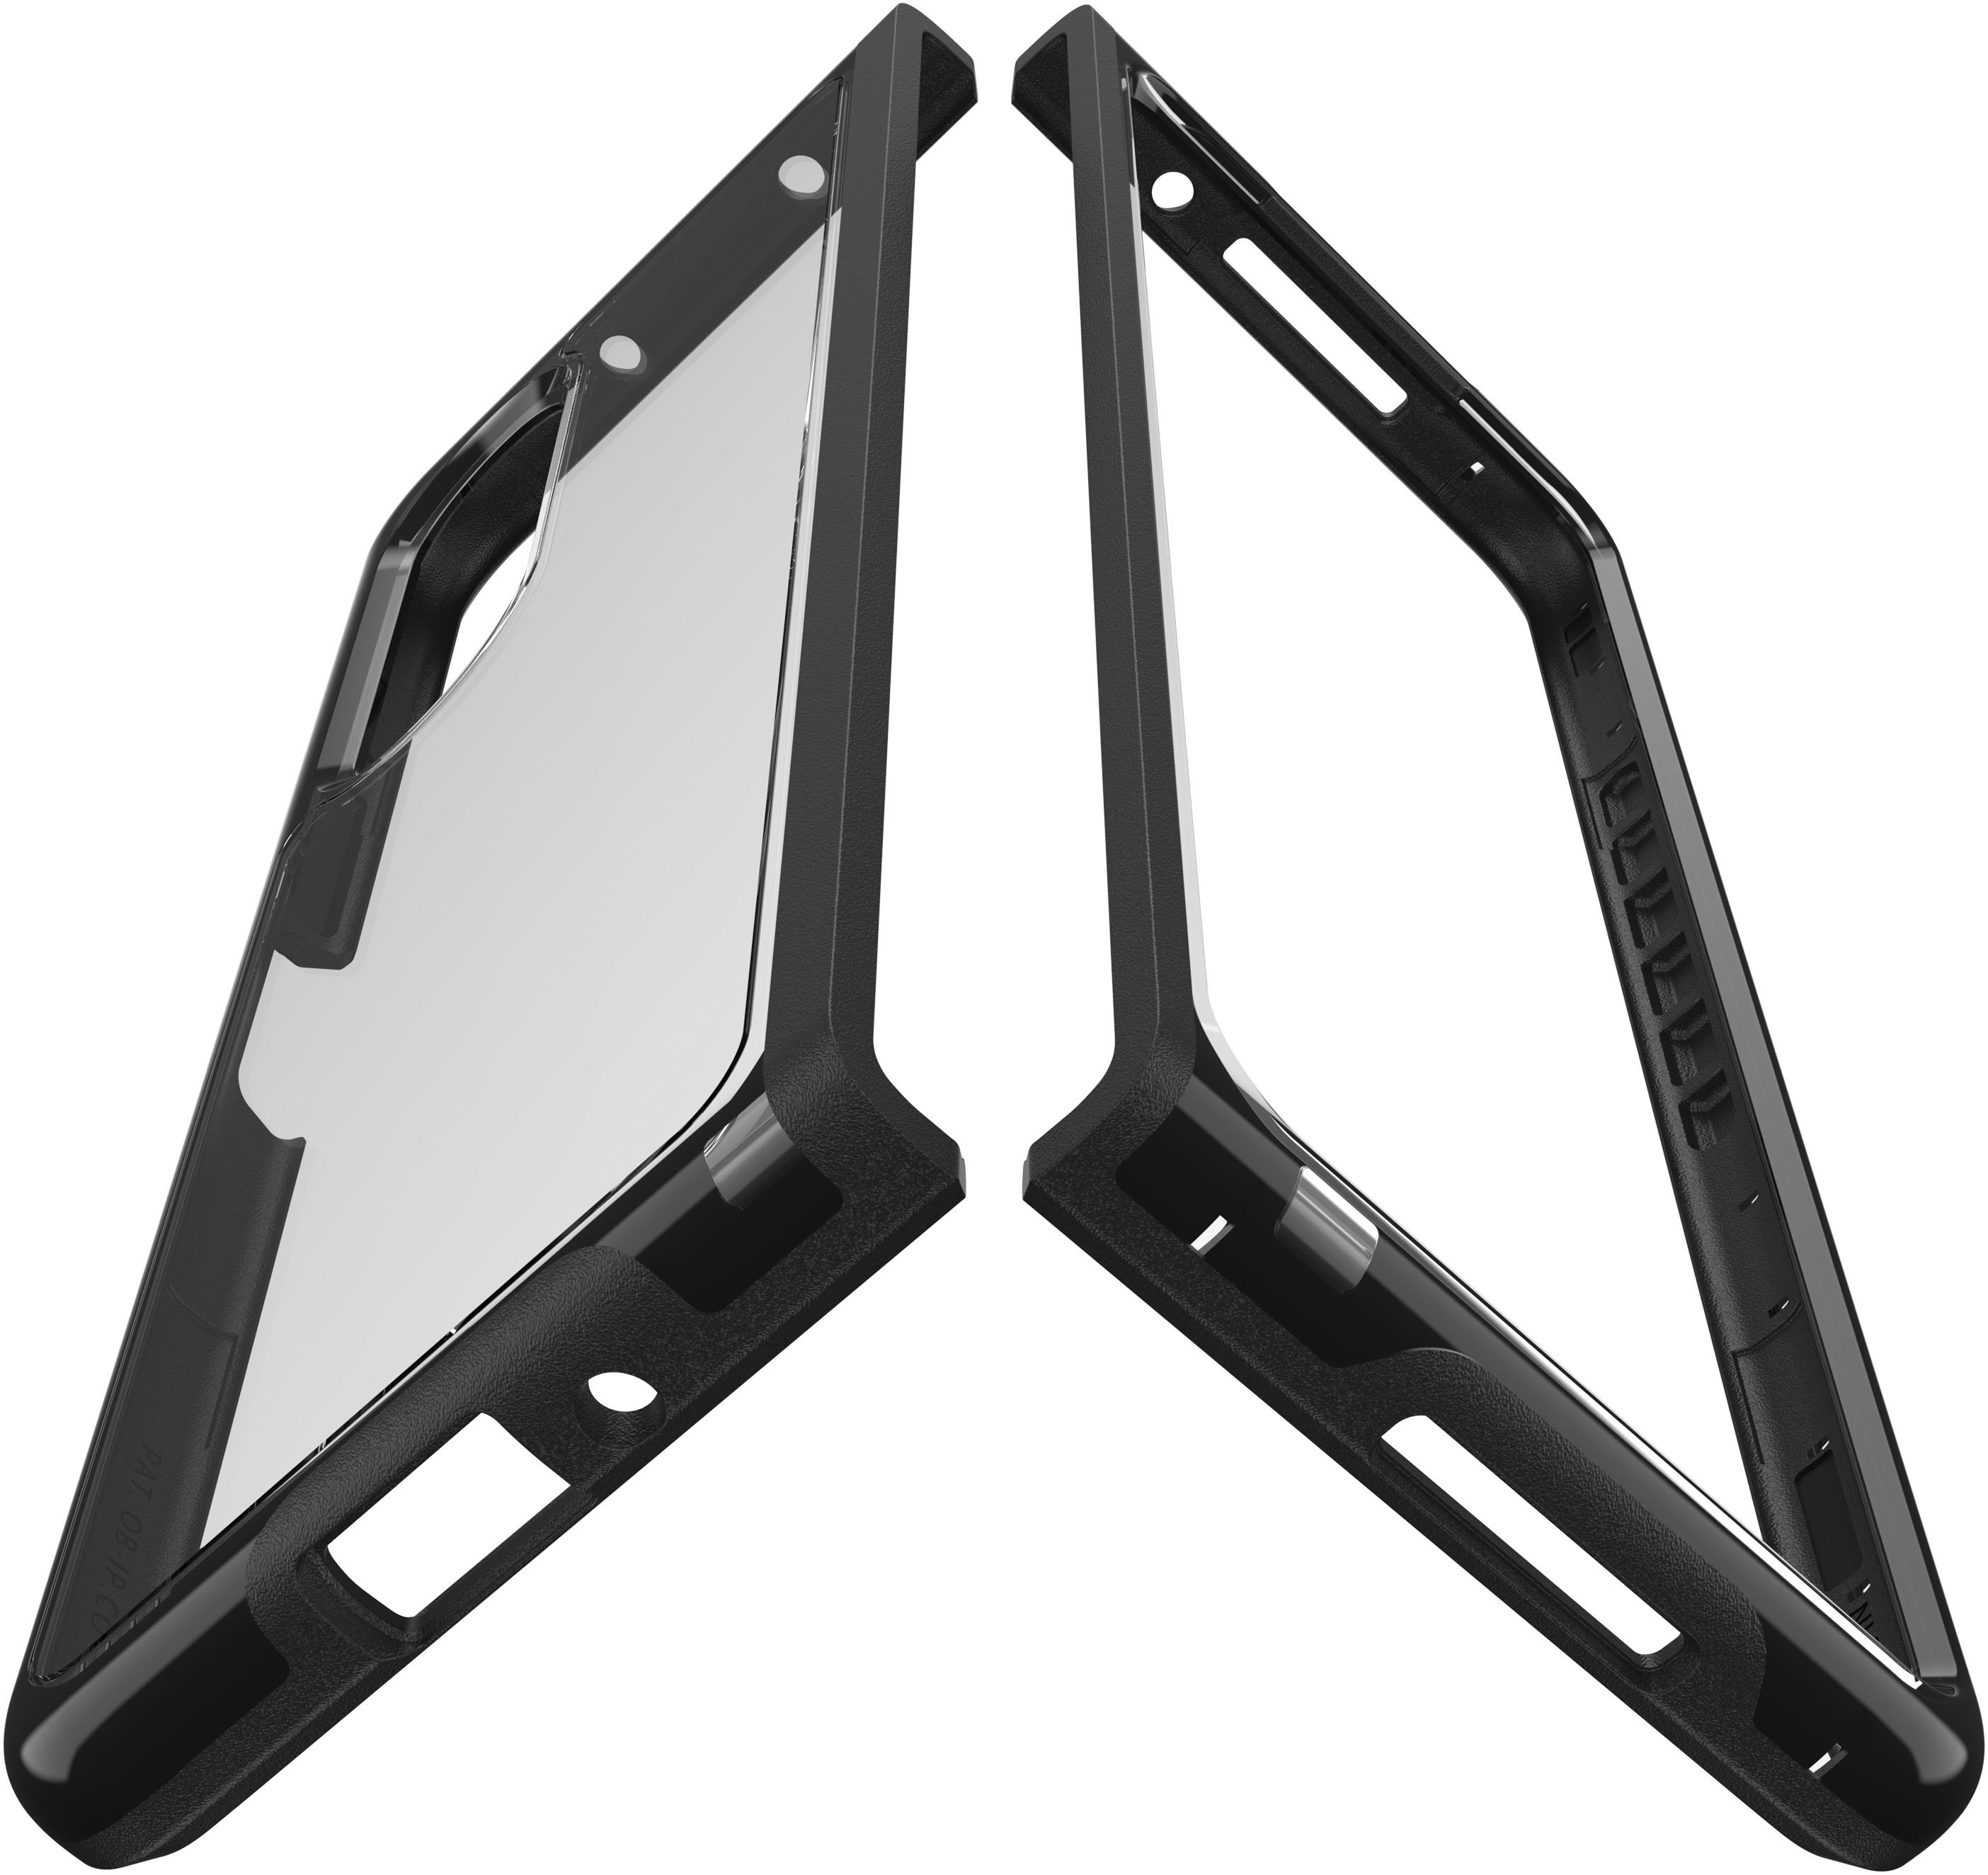 OtterBox Symmetry Flex Series case for Galaxy Z Fold 3: Now down by $41!